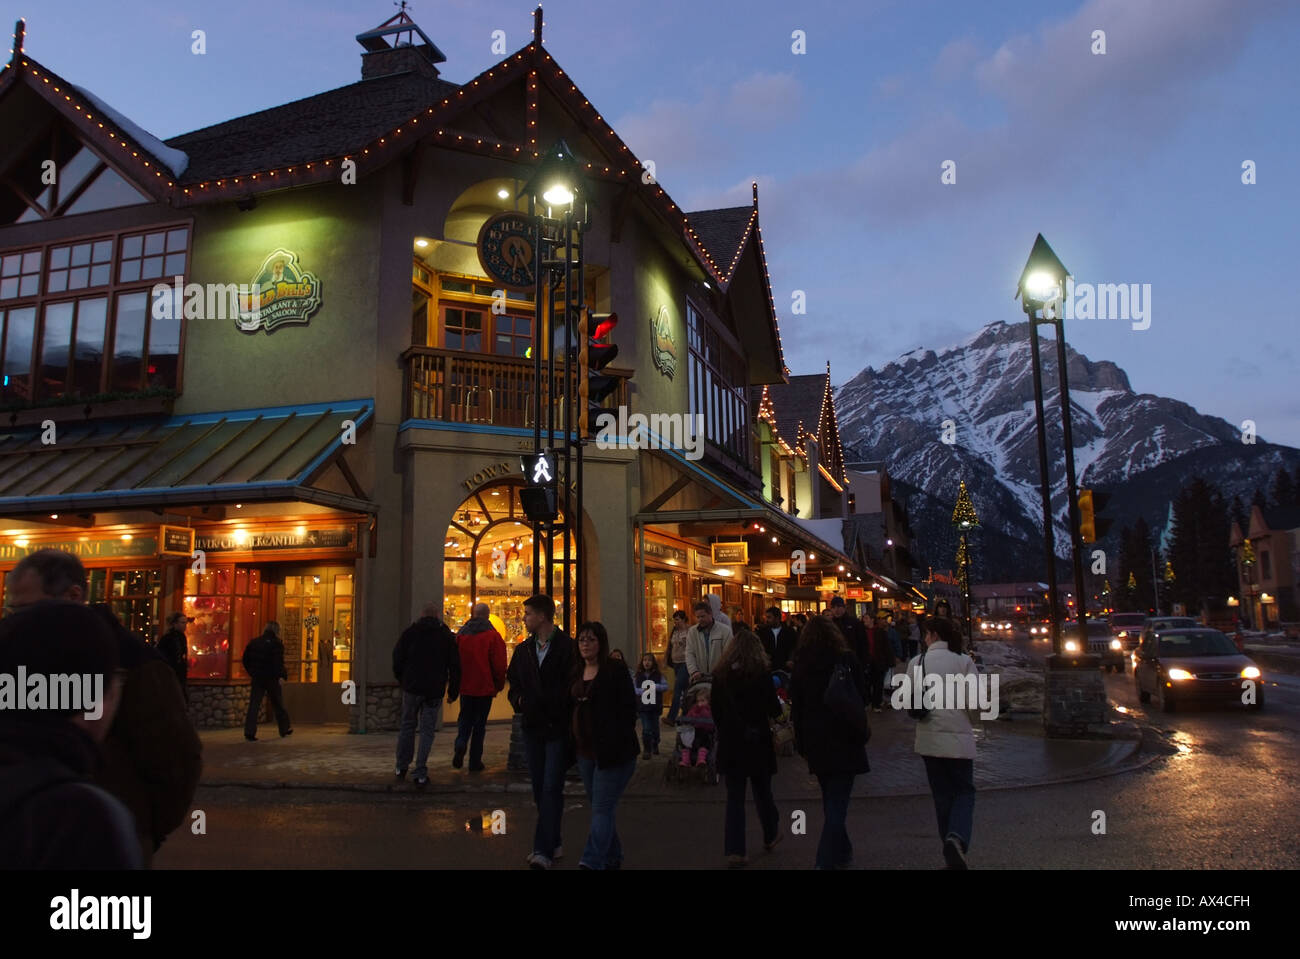 CANADA Alberta Banff Banff National Park Evening on Banff Avenue in the town of Banff Stock Photo